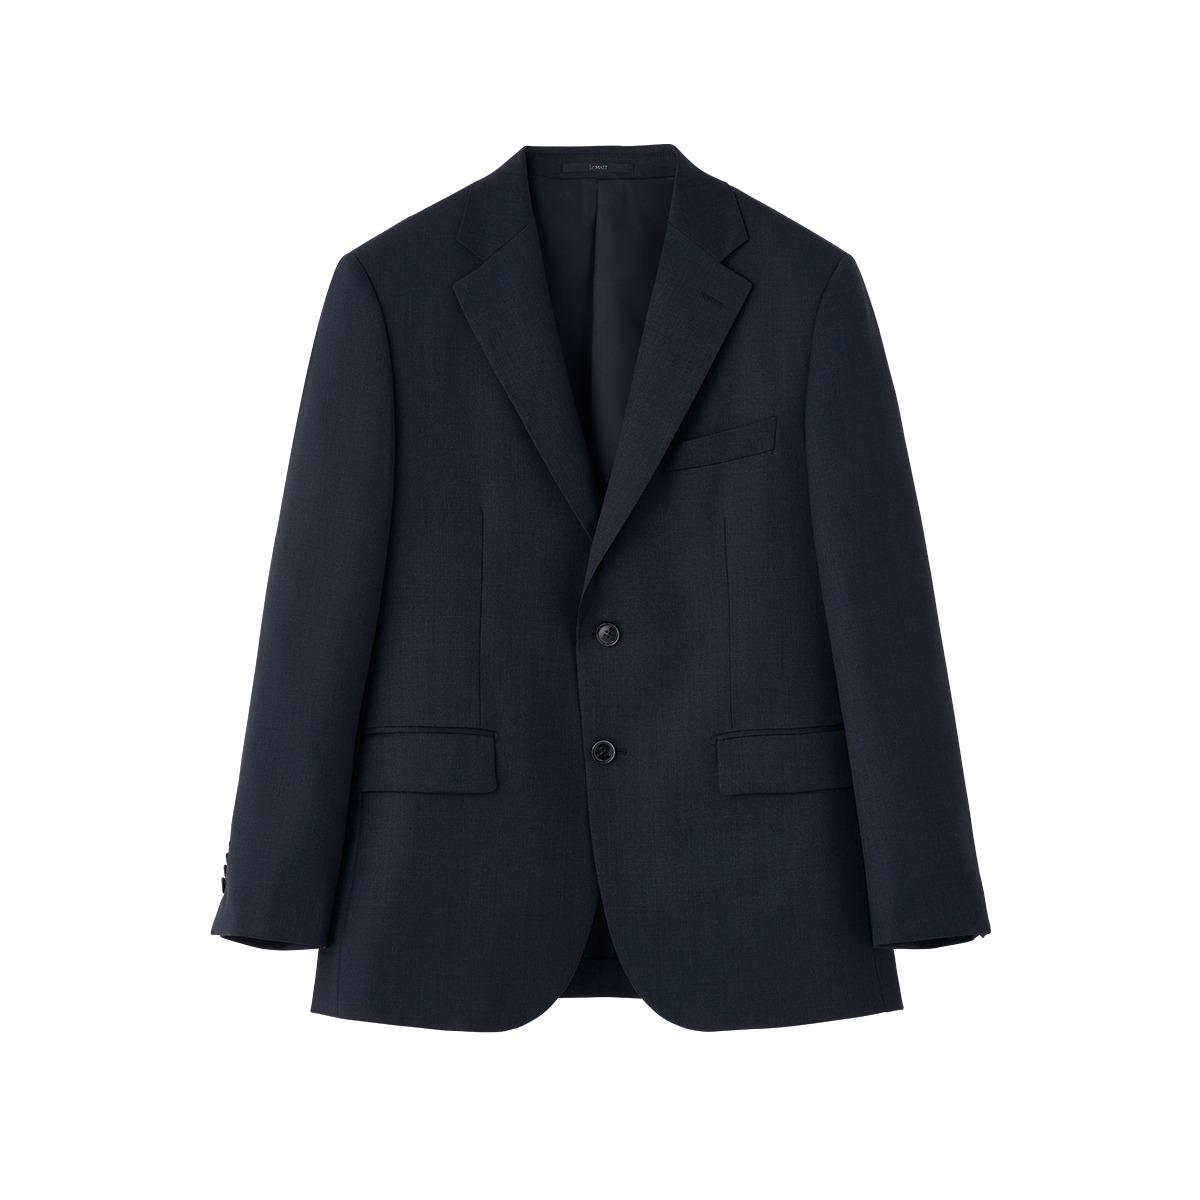 Navy Solid Wool Suit